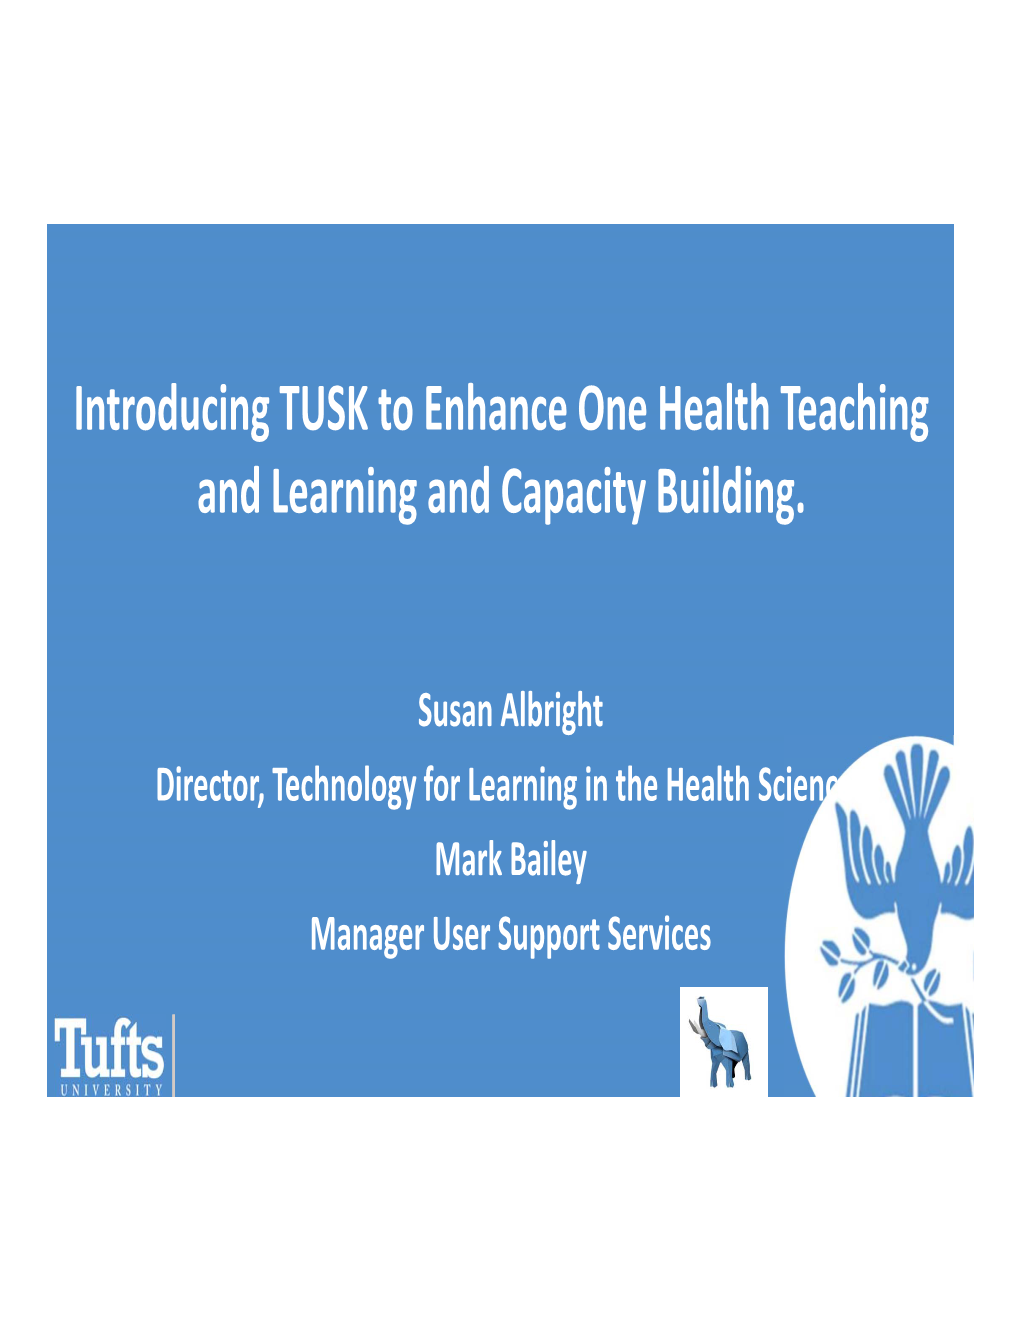 Introducing TUSK to Enhance One Health Teaching and Learning and Capacity Building